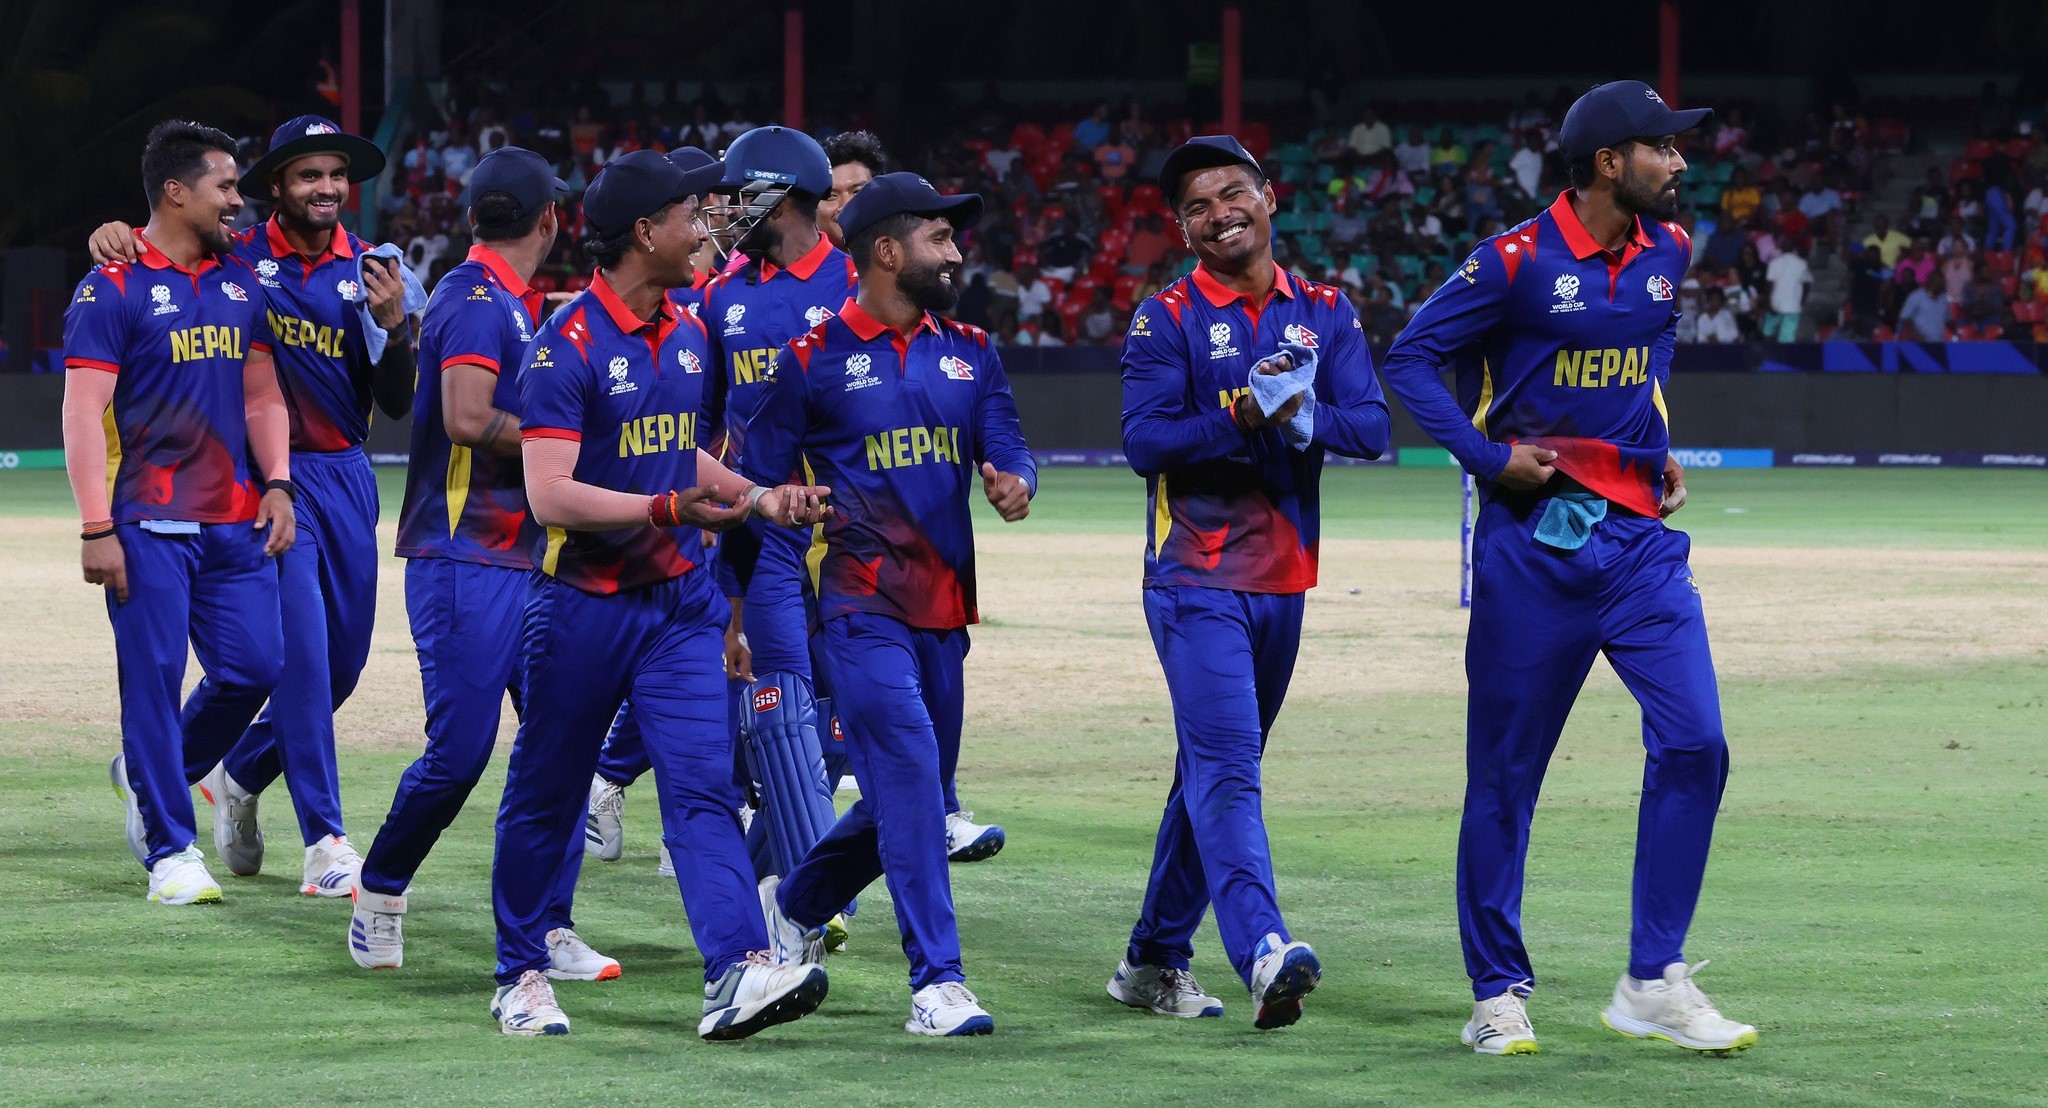 Bangladesh defeats Nepal by 21 runs, Nepal exits World Cup without victories